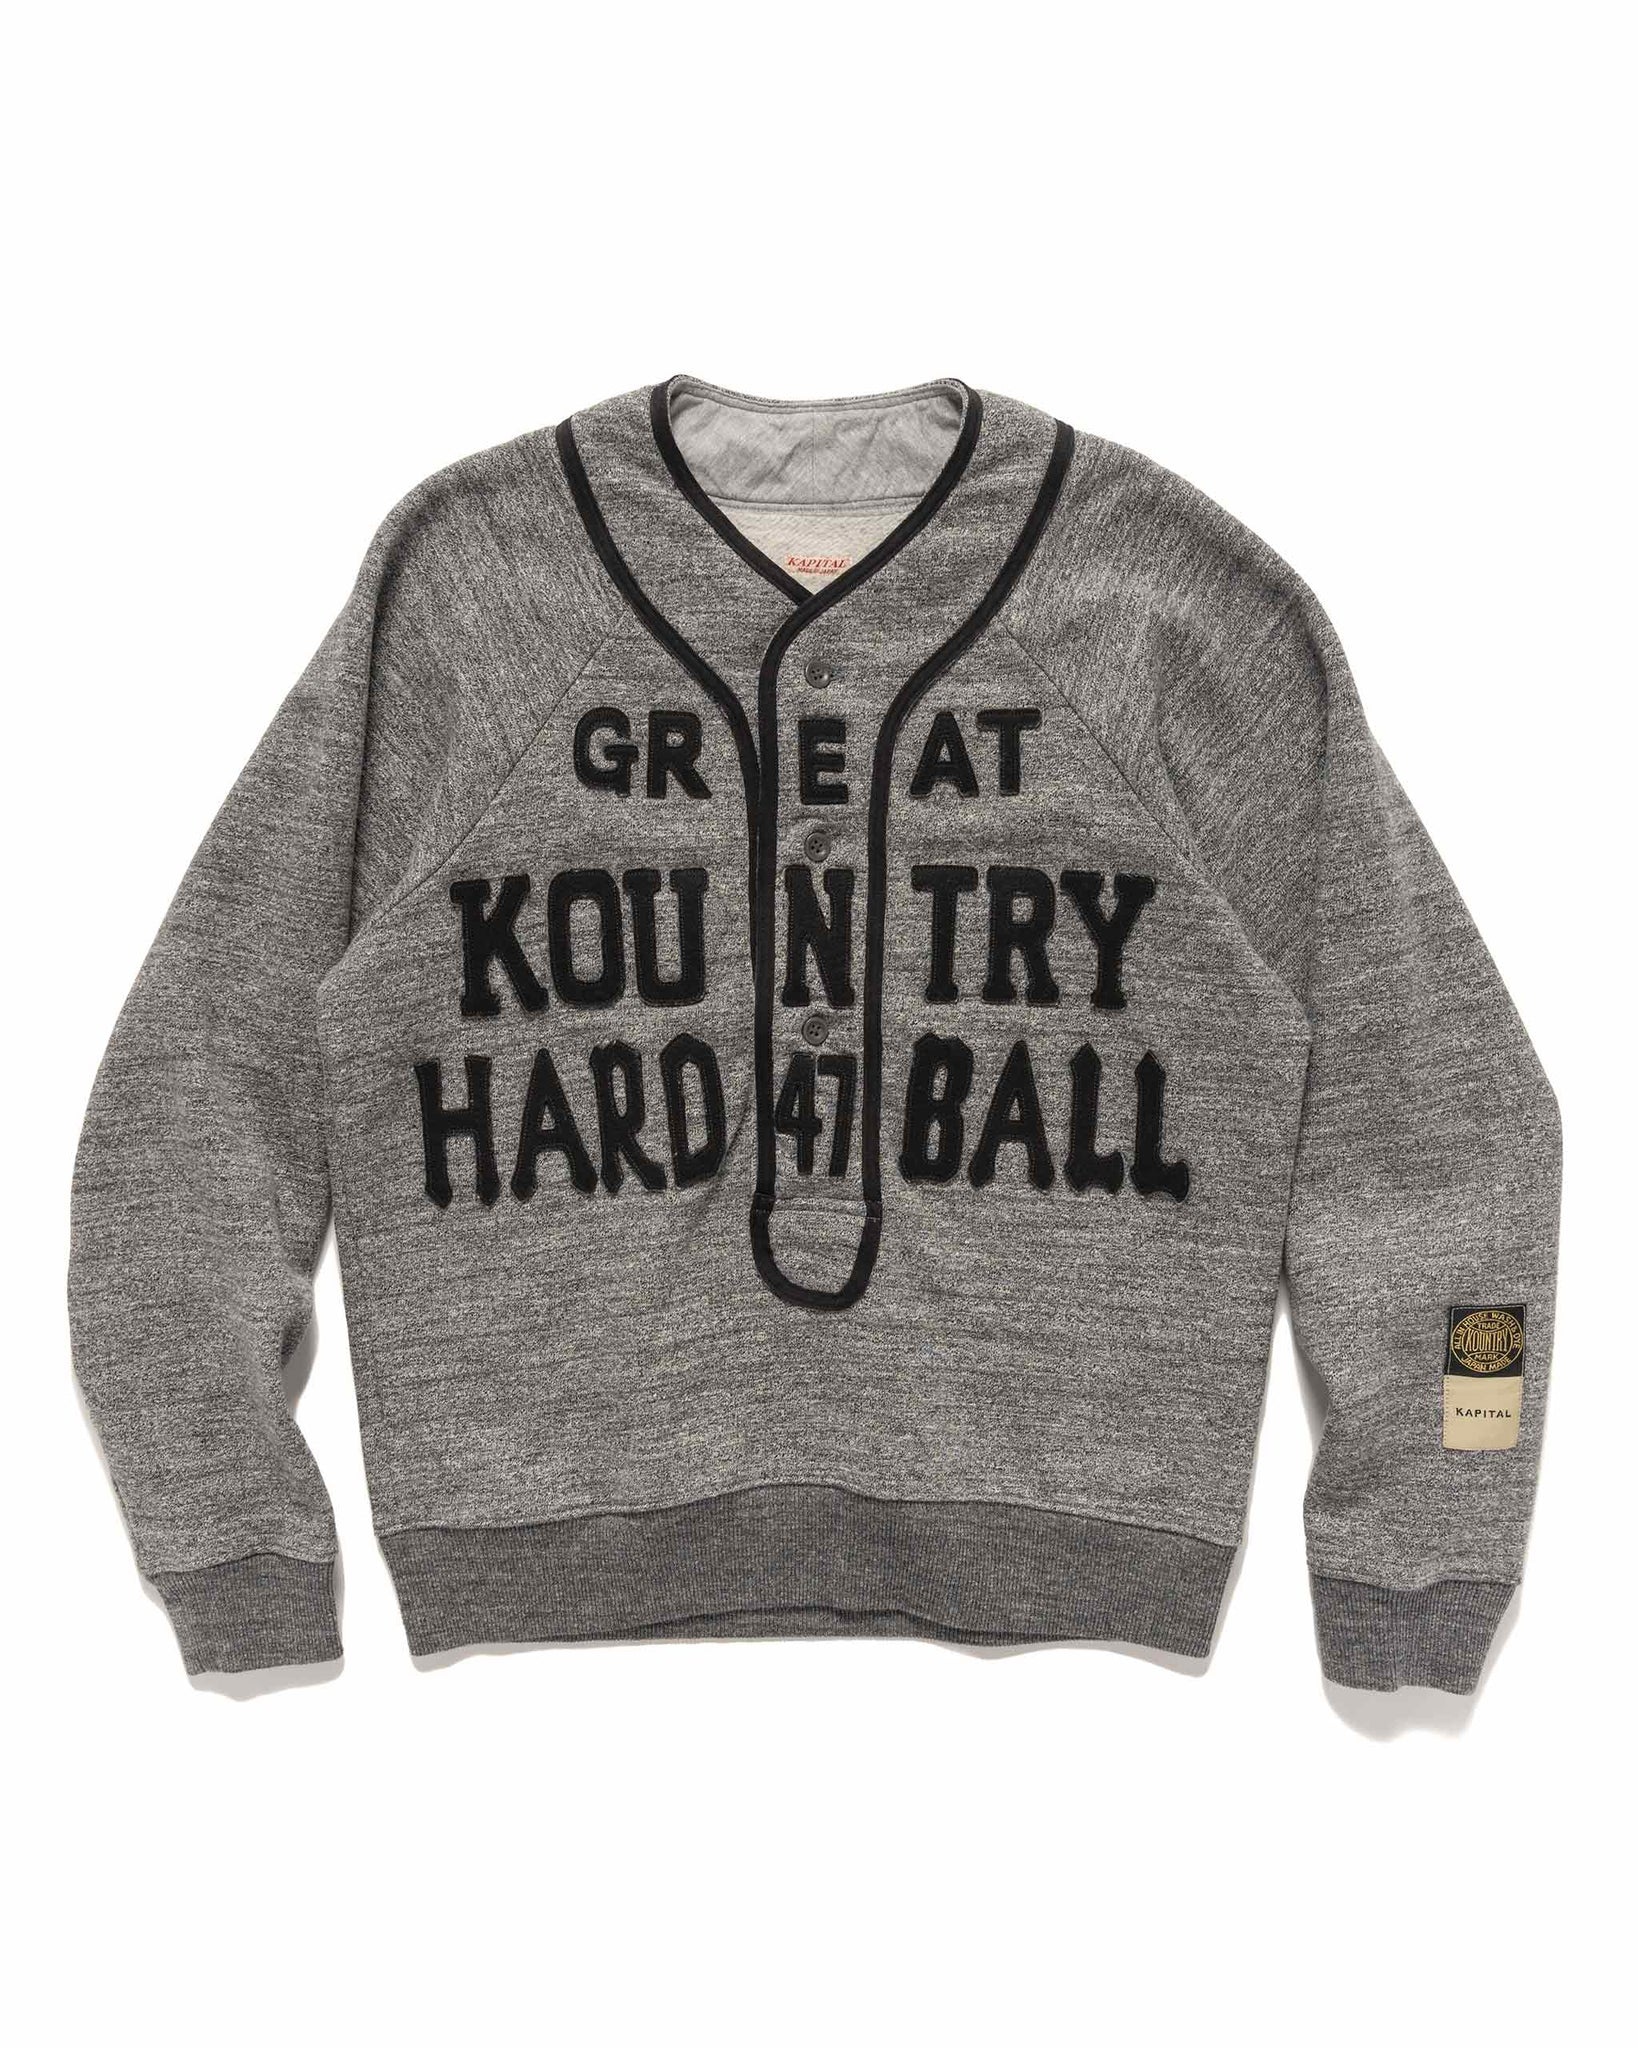 TOP Jersey Baseball Henley SWT (GREAT KOUNTRY) Charcoal - 1